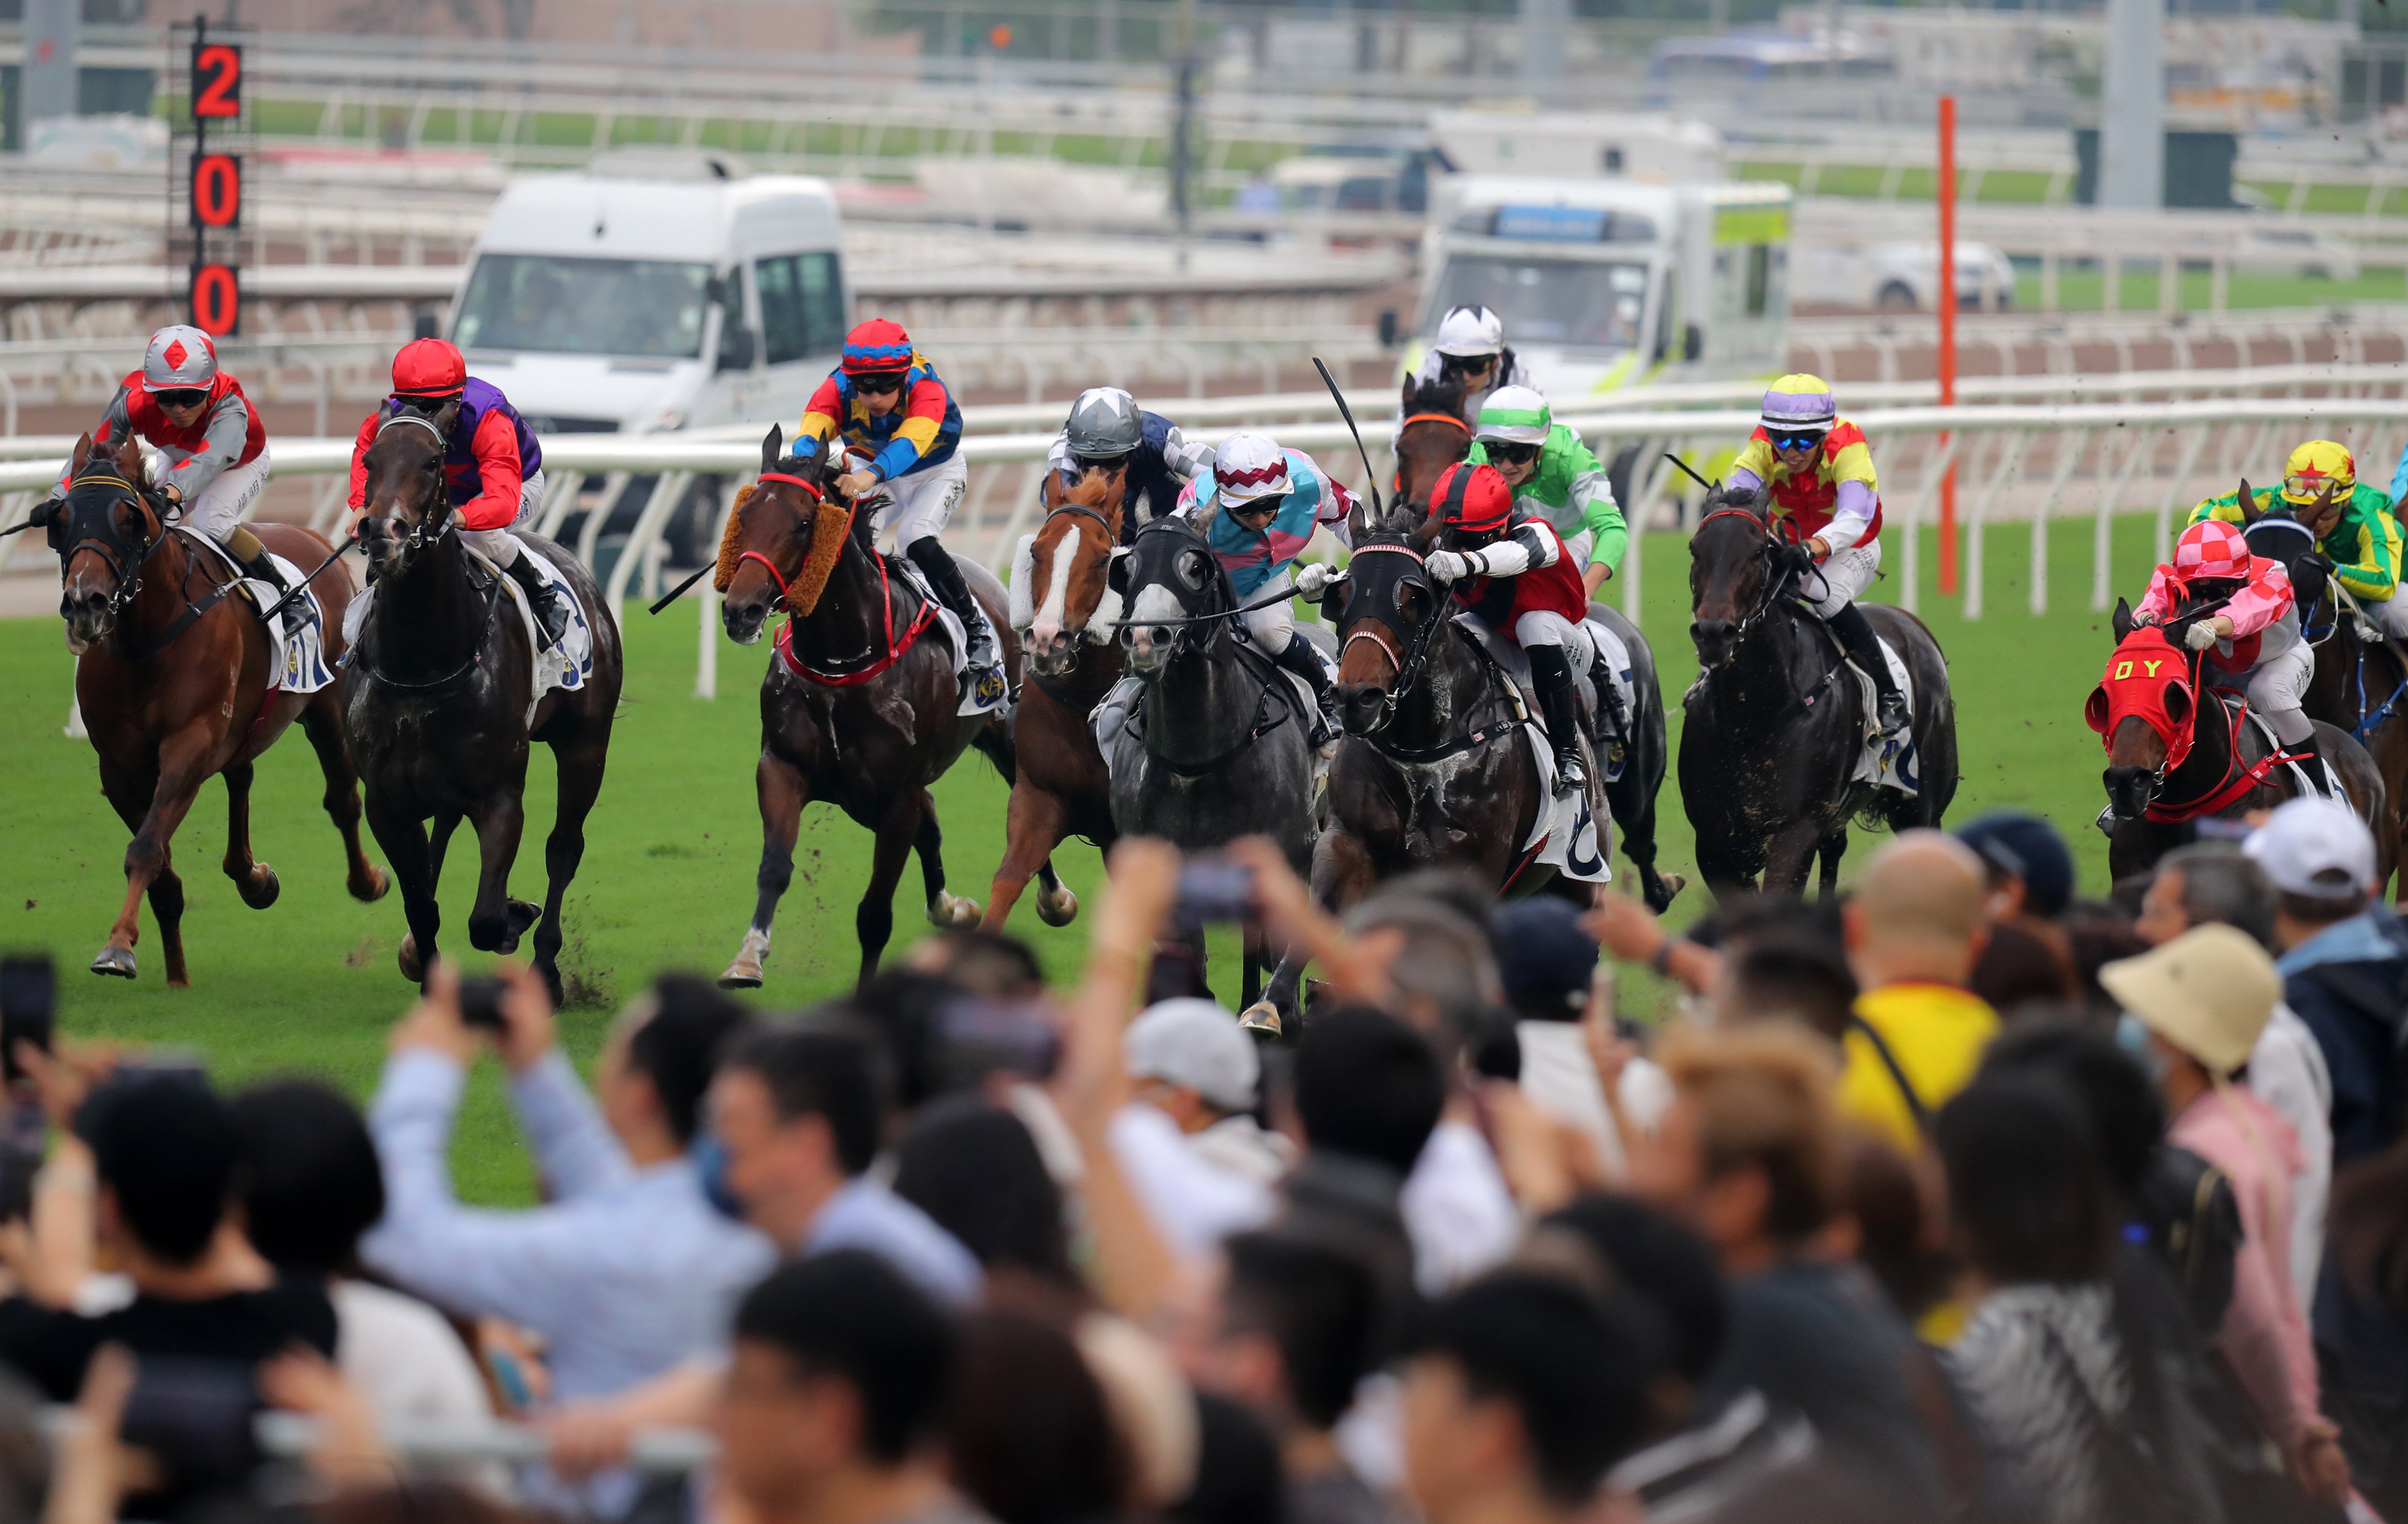 A horse race at Sha Tin on April 20. The fractional horse ownership or investment model has been in robust operation in Japan, Australia, the United Kingdom and the United States, and could be considered for Hong Kong. Photo: Kenneth Chan.